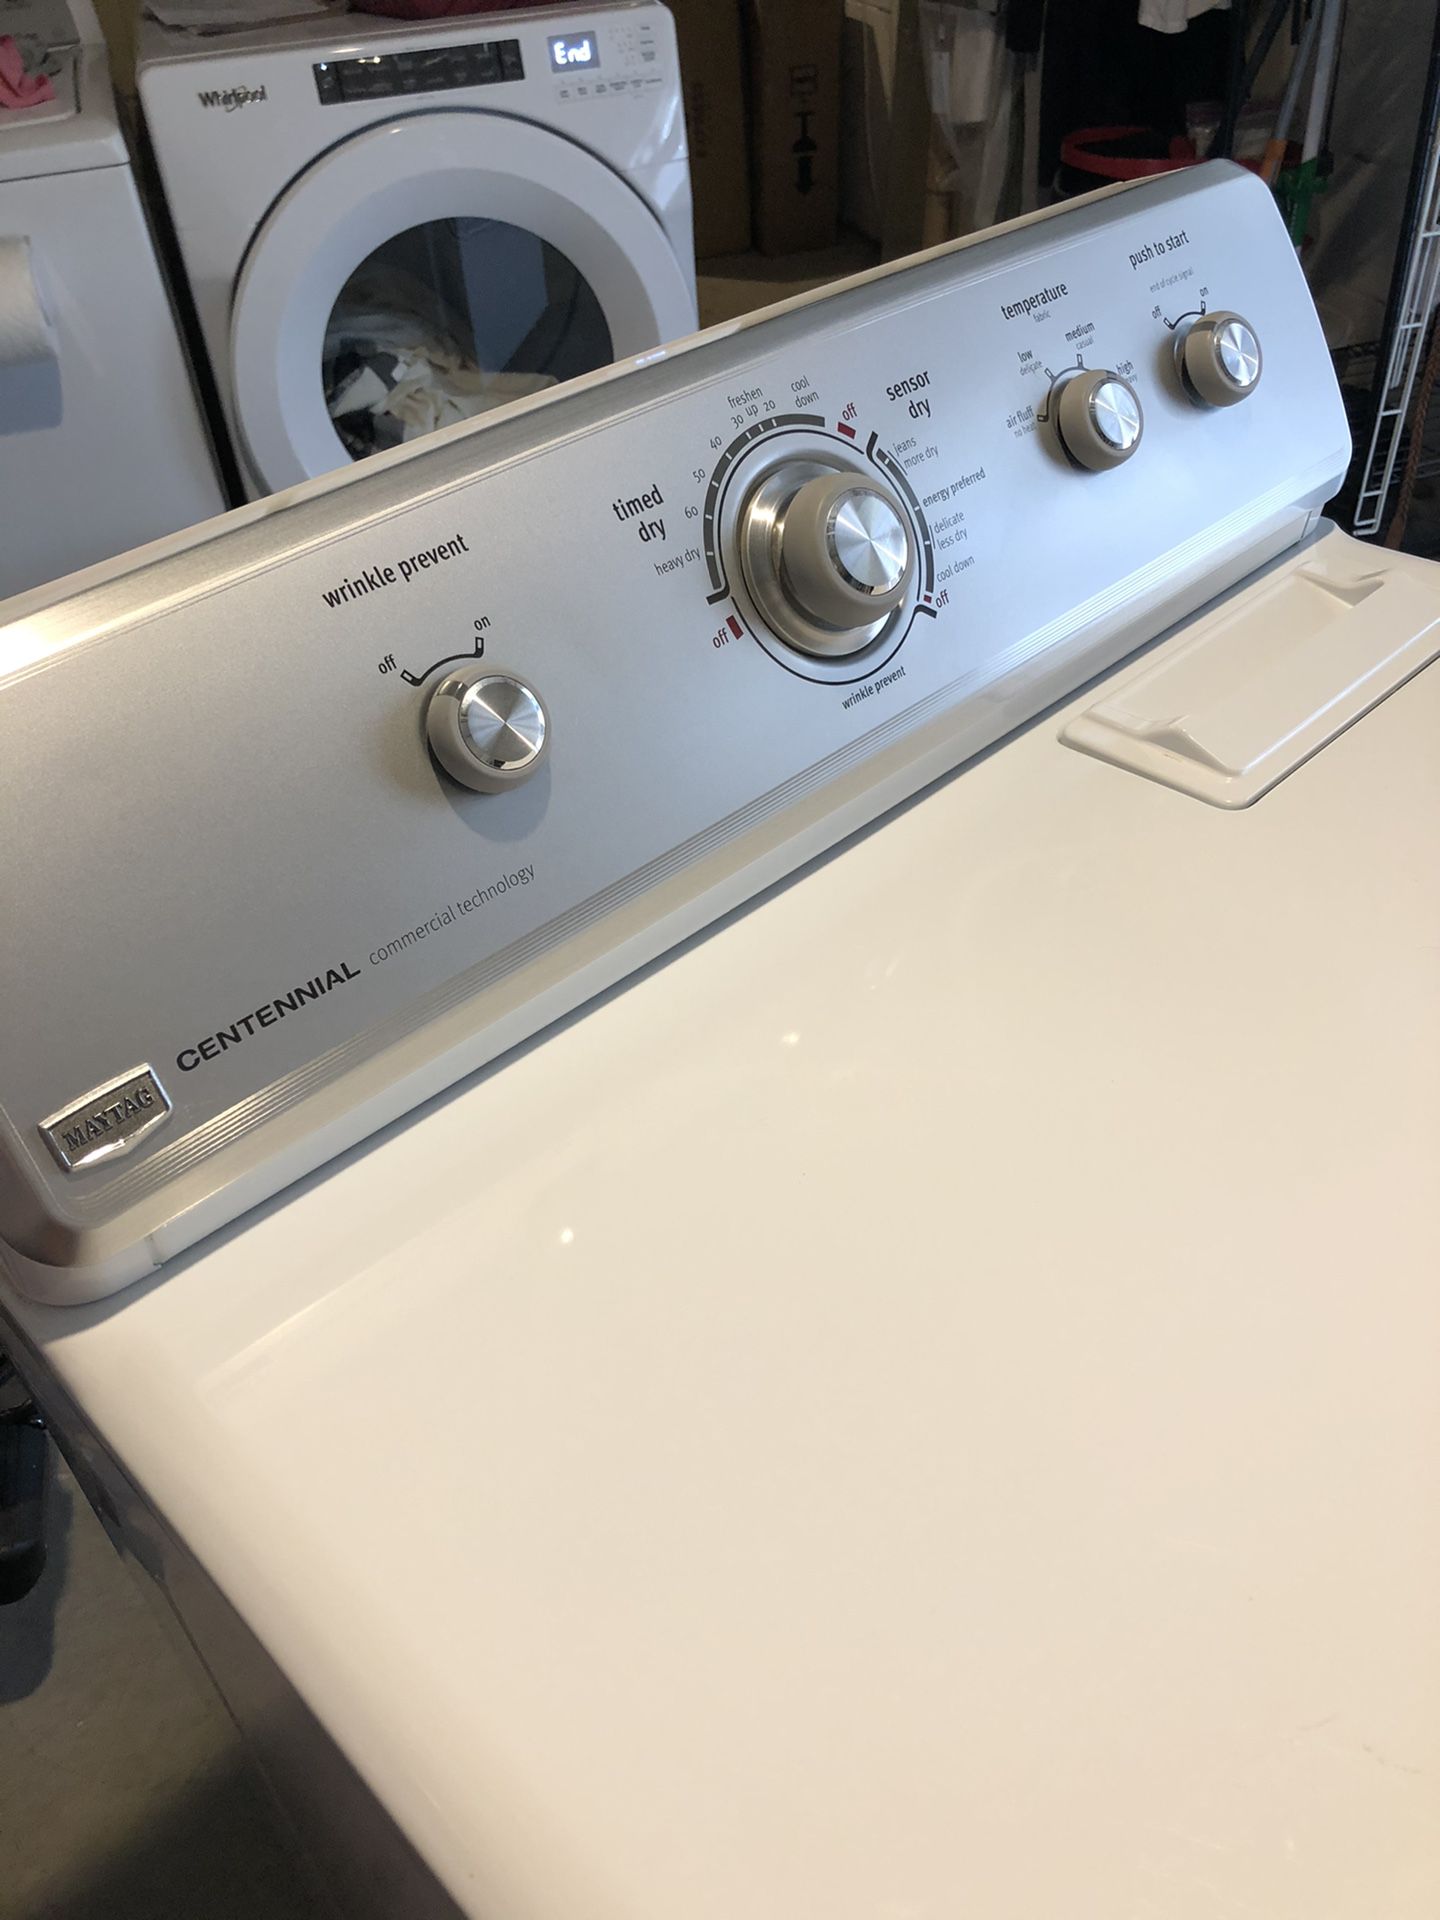 Maytag centennial electric dryer - excellent condition!